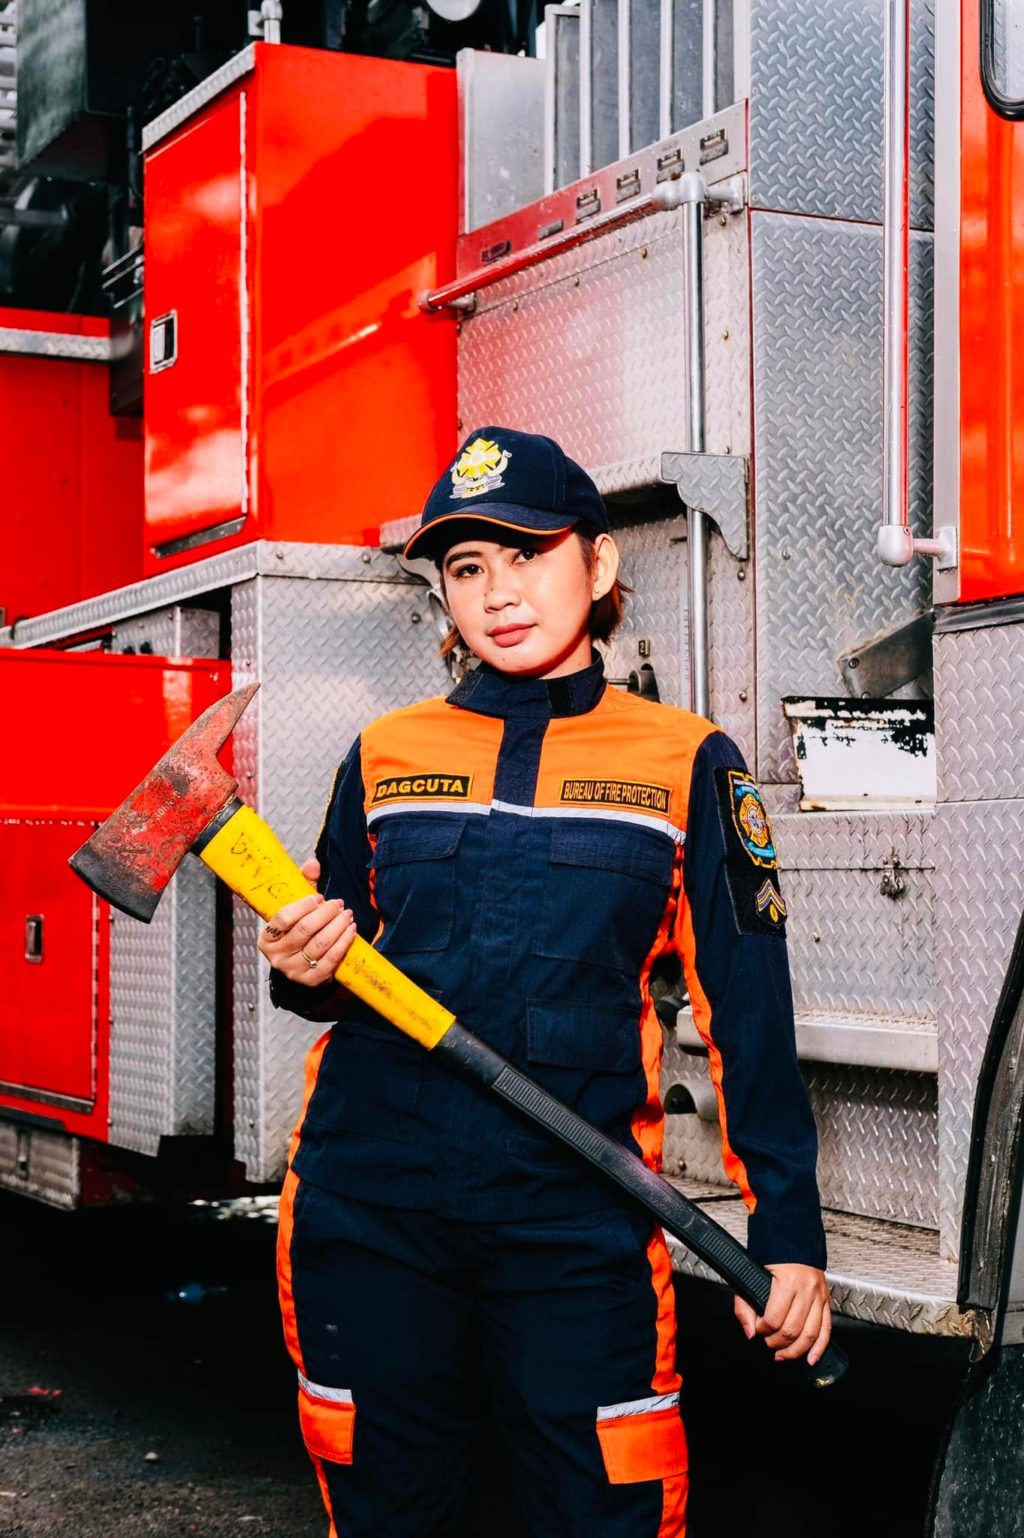 WOMAN FIREFIGHTER OF CCFO. FO1 Novie Dagcuta, woman firefighter of the CCFO, says that she has learned to love the job as a firefighter, embracing its risks and challenges. Photo courtesy of BFP R7 Cebu City Fire Office Facebook page (file photo)